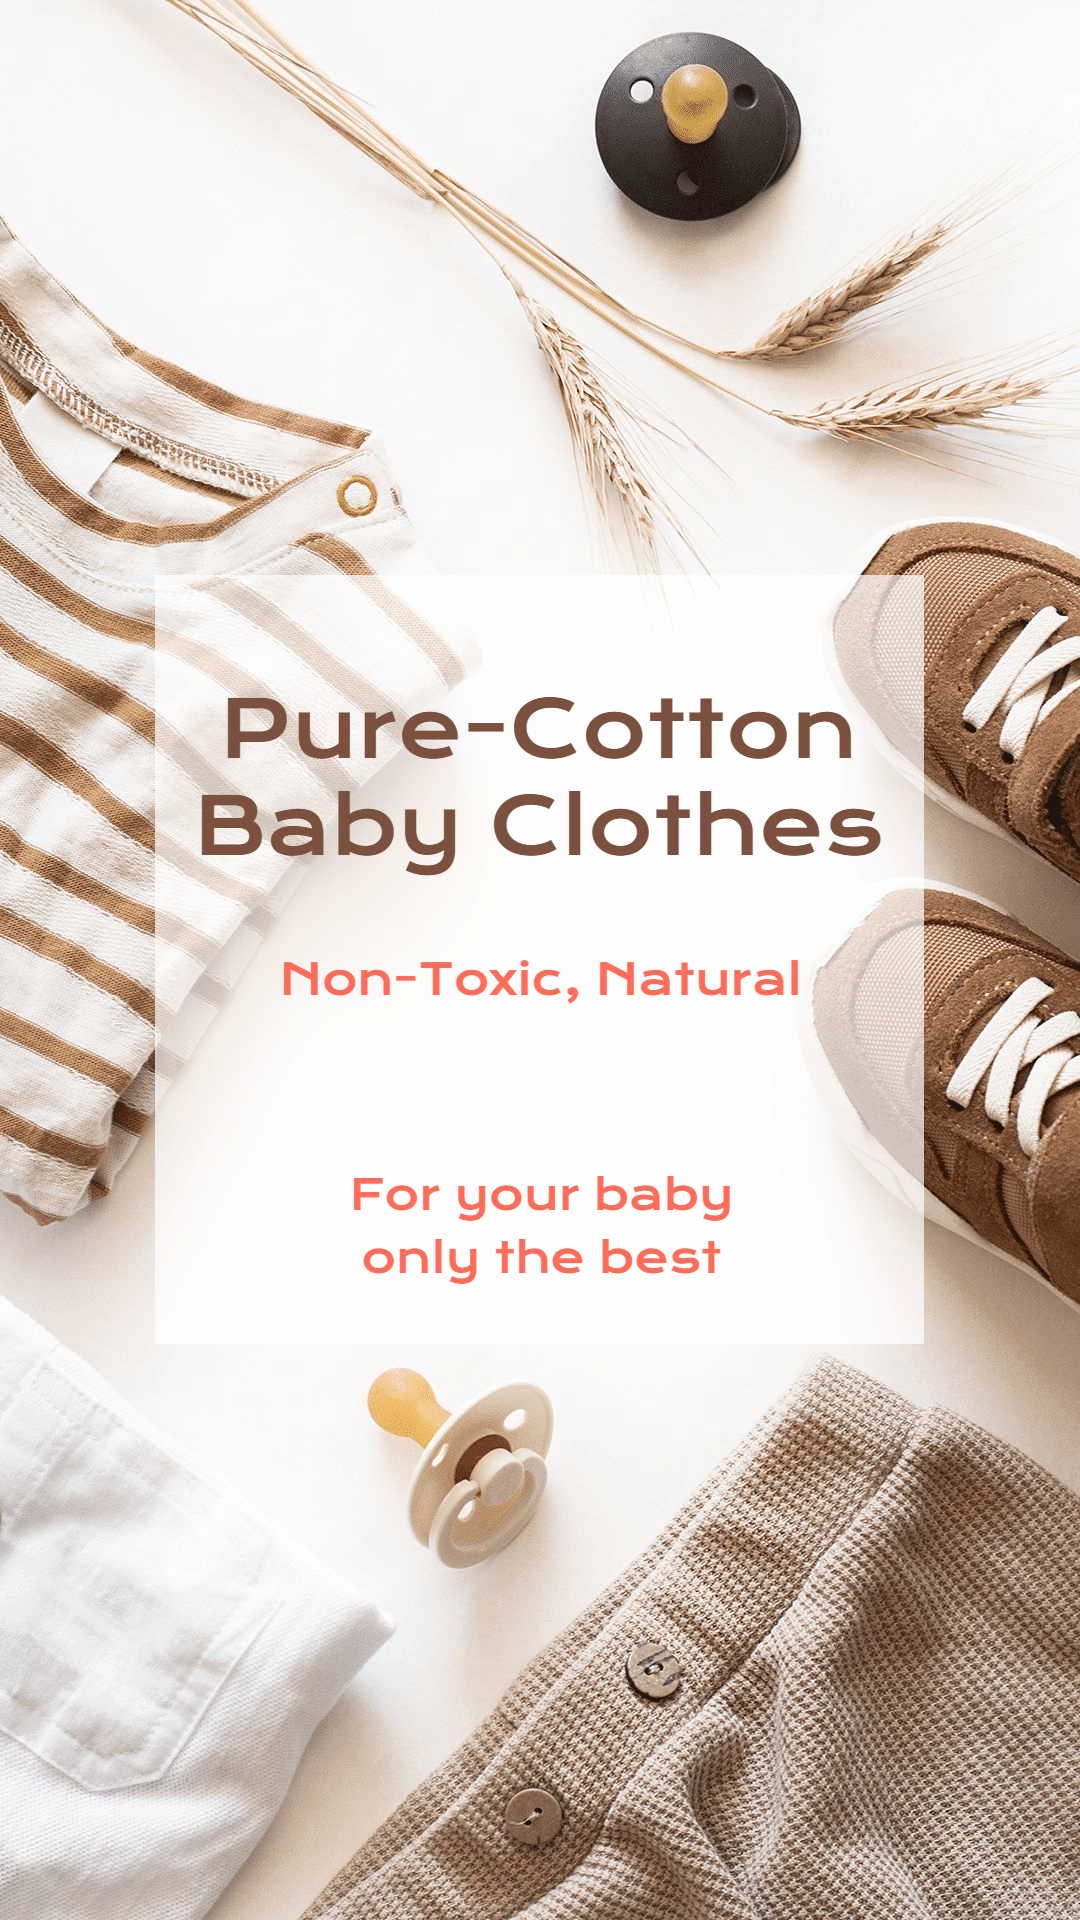 Pure-Cotton Baby Clothing Brand Ecommerce Story